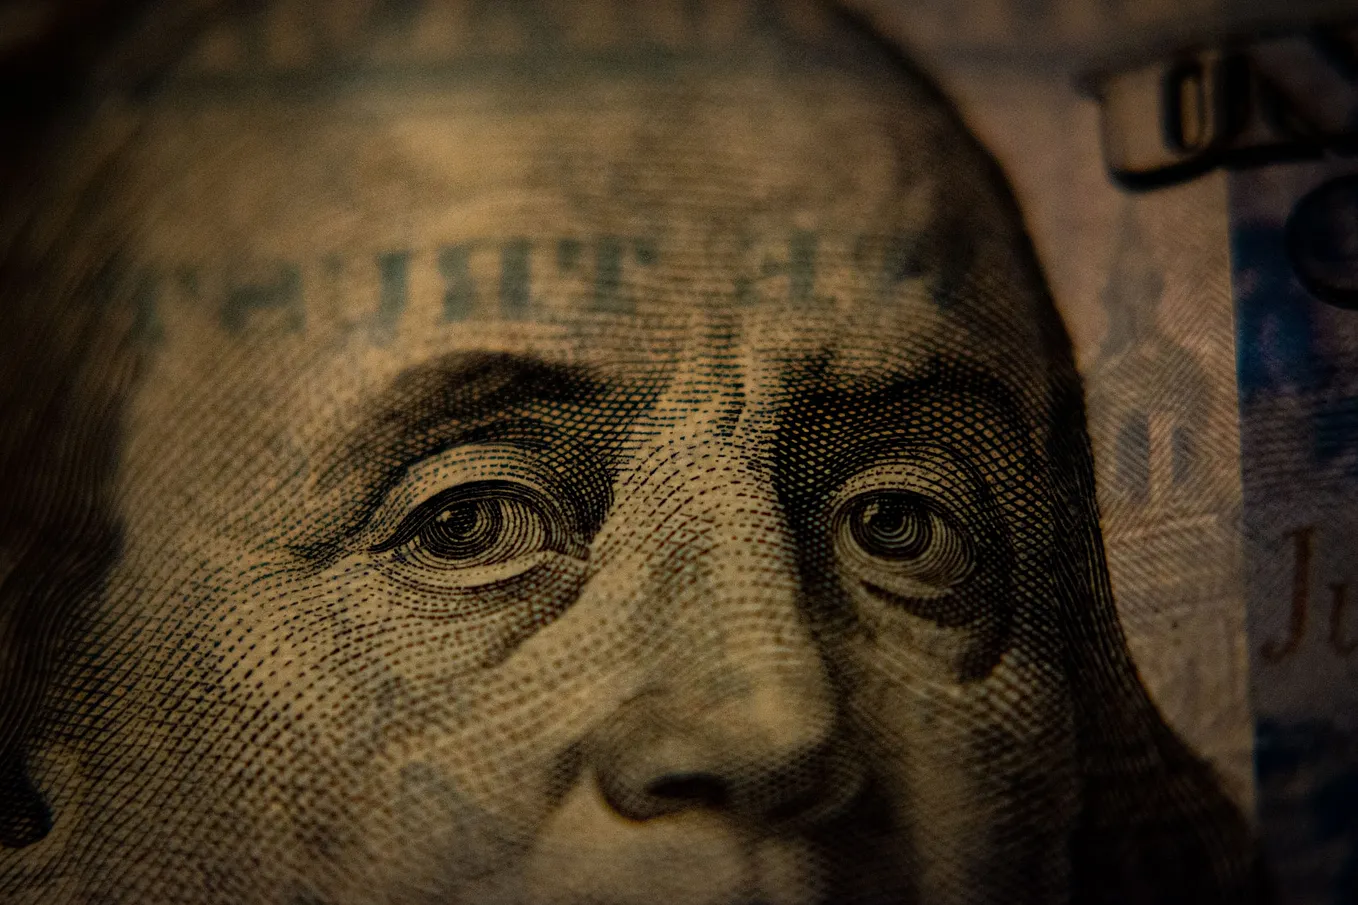 IMAGE: A closeup of a 100 dollars bill, with Ben Franklin looking worried